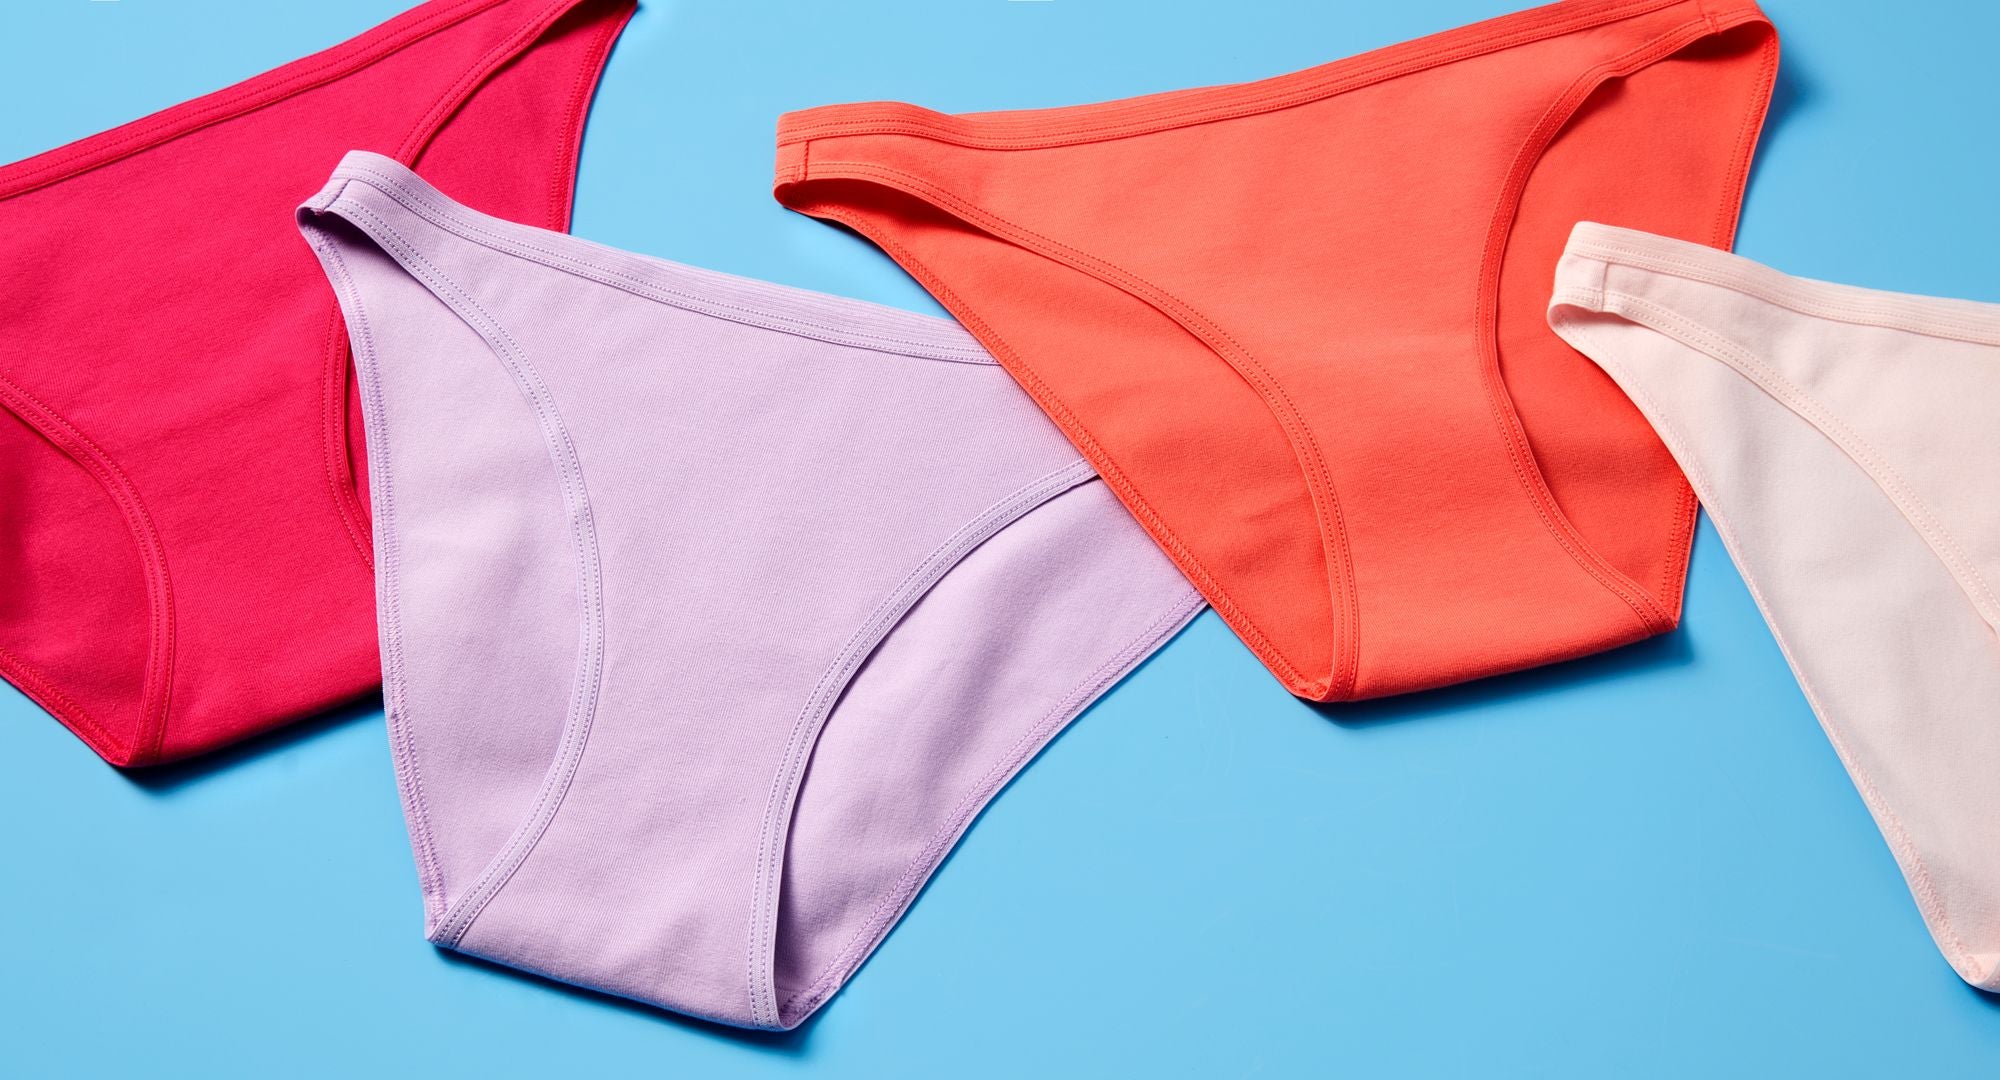 Prevent Rolling Down With High-Waisted Seamless Underwear: A